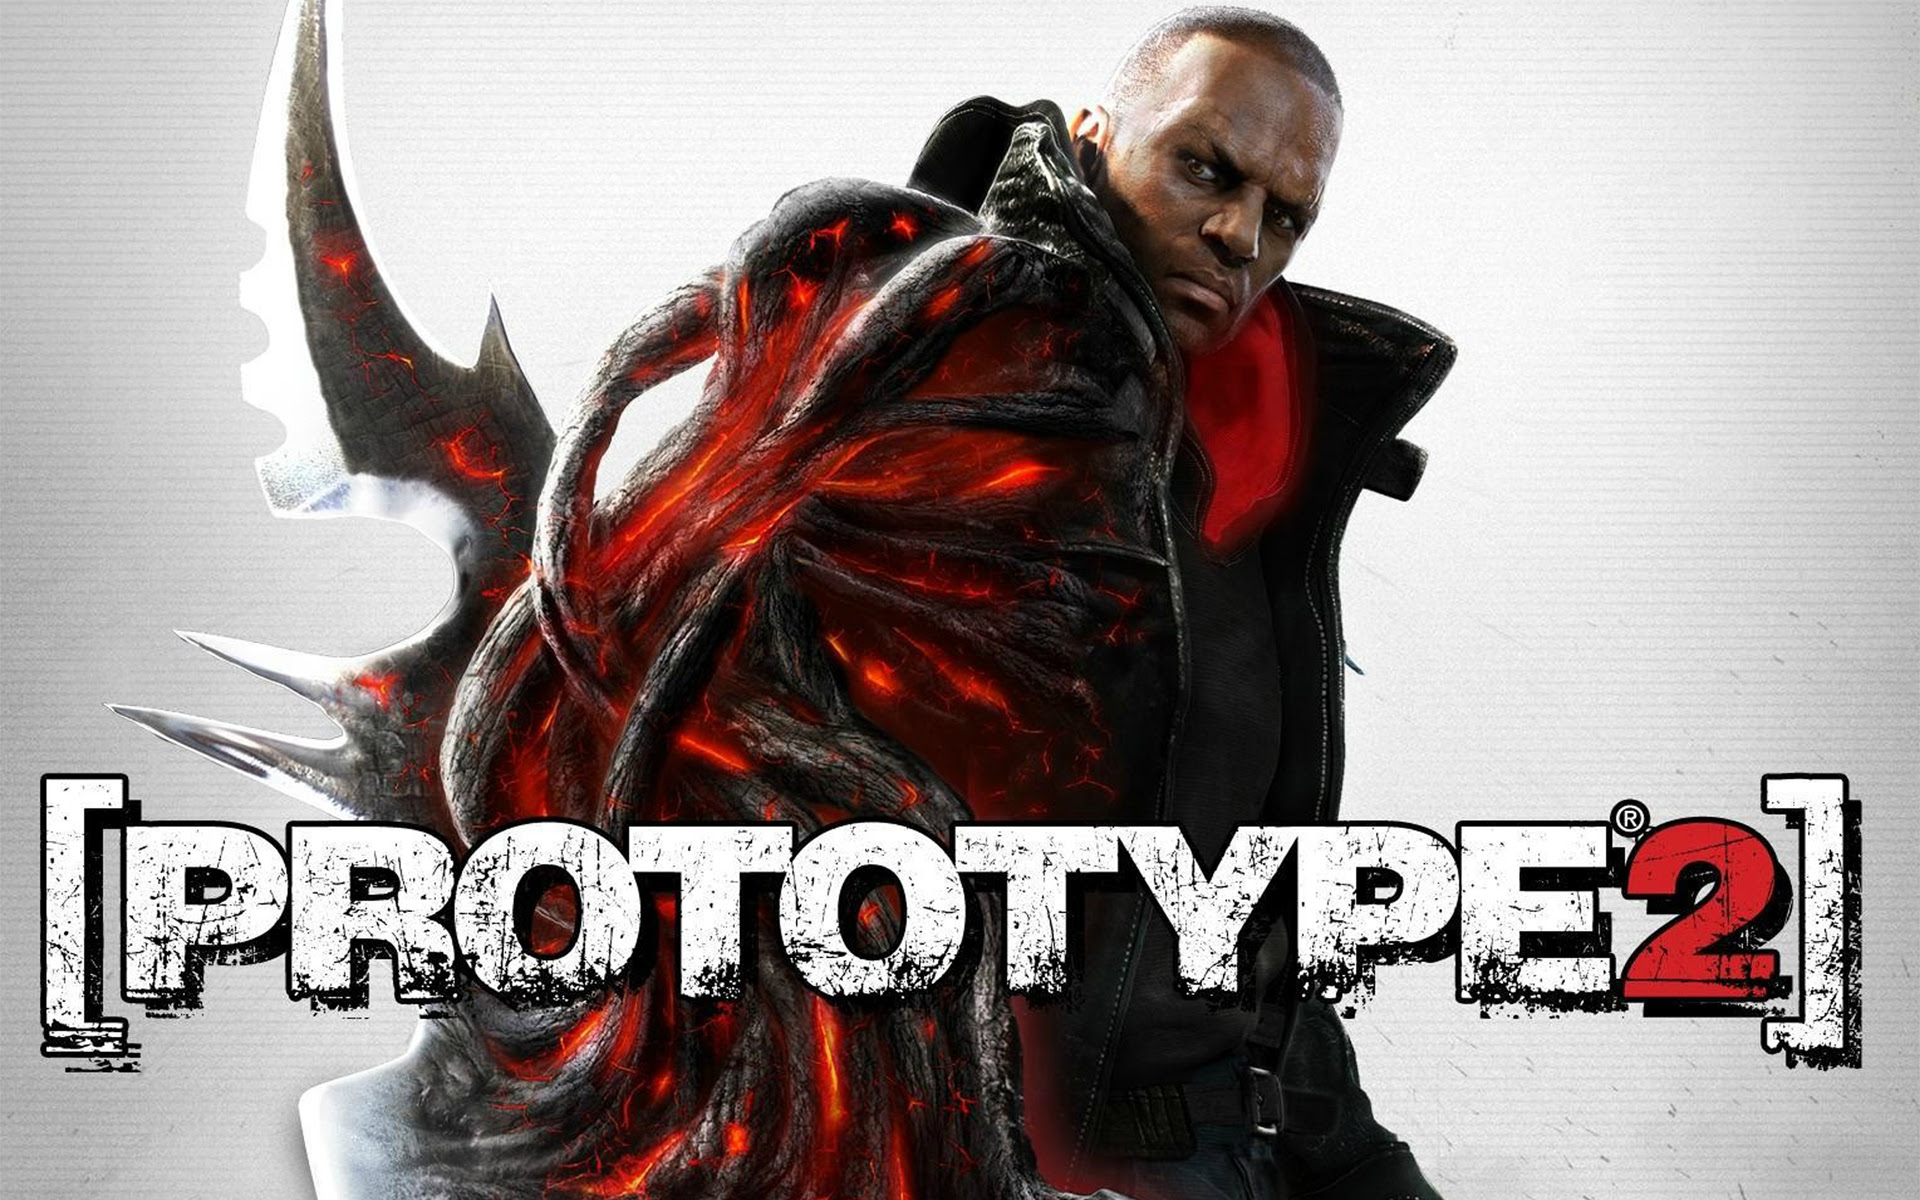  Free Download PC game setup in direct single link for windows Prototype 2 Free Download